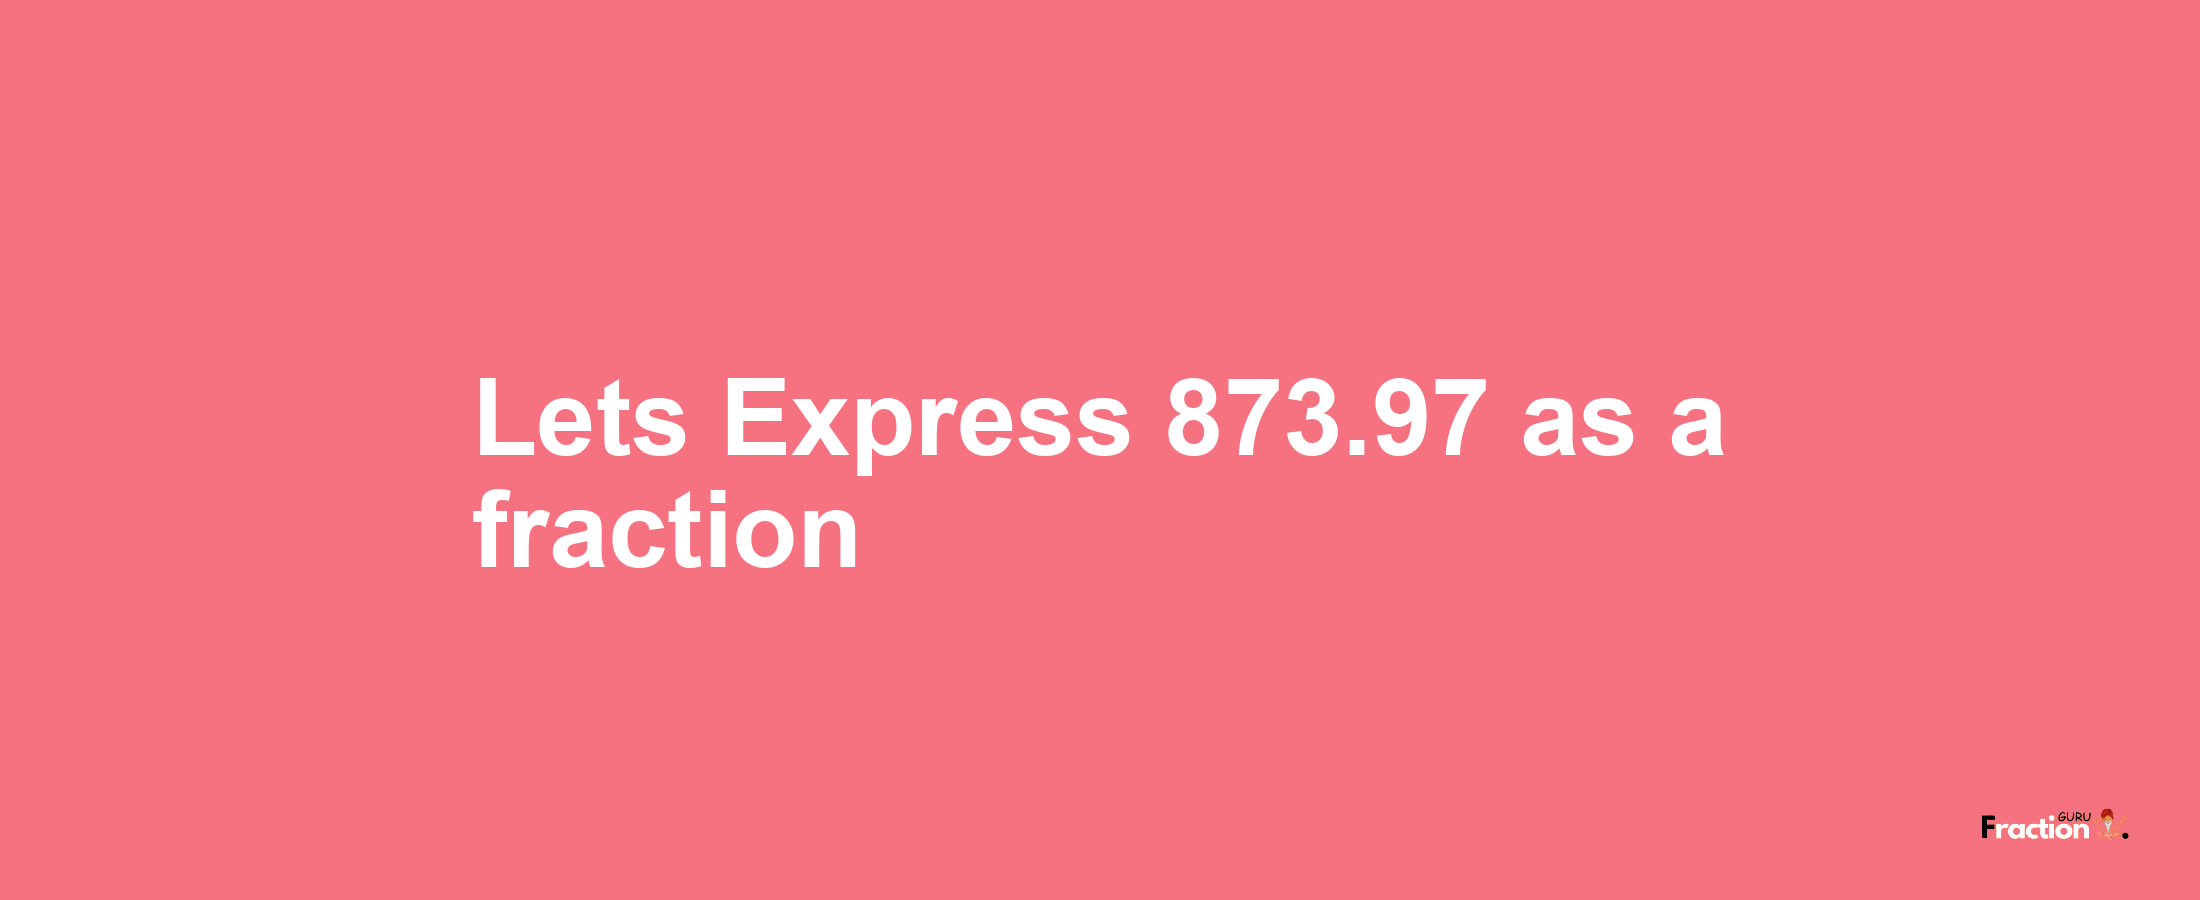 Lets Express 873.97 as afraction